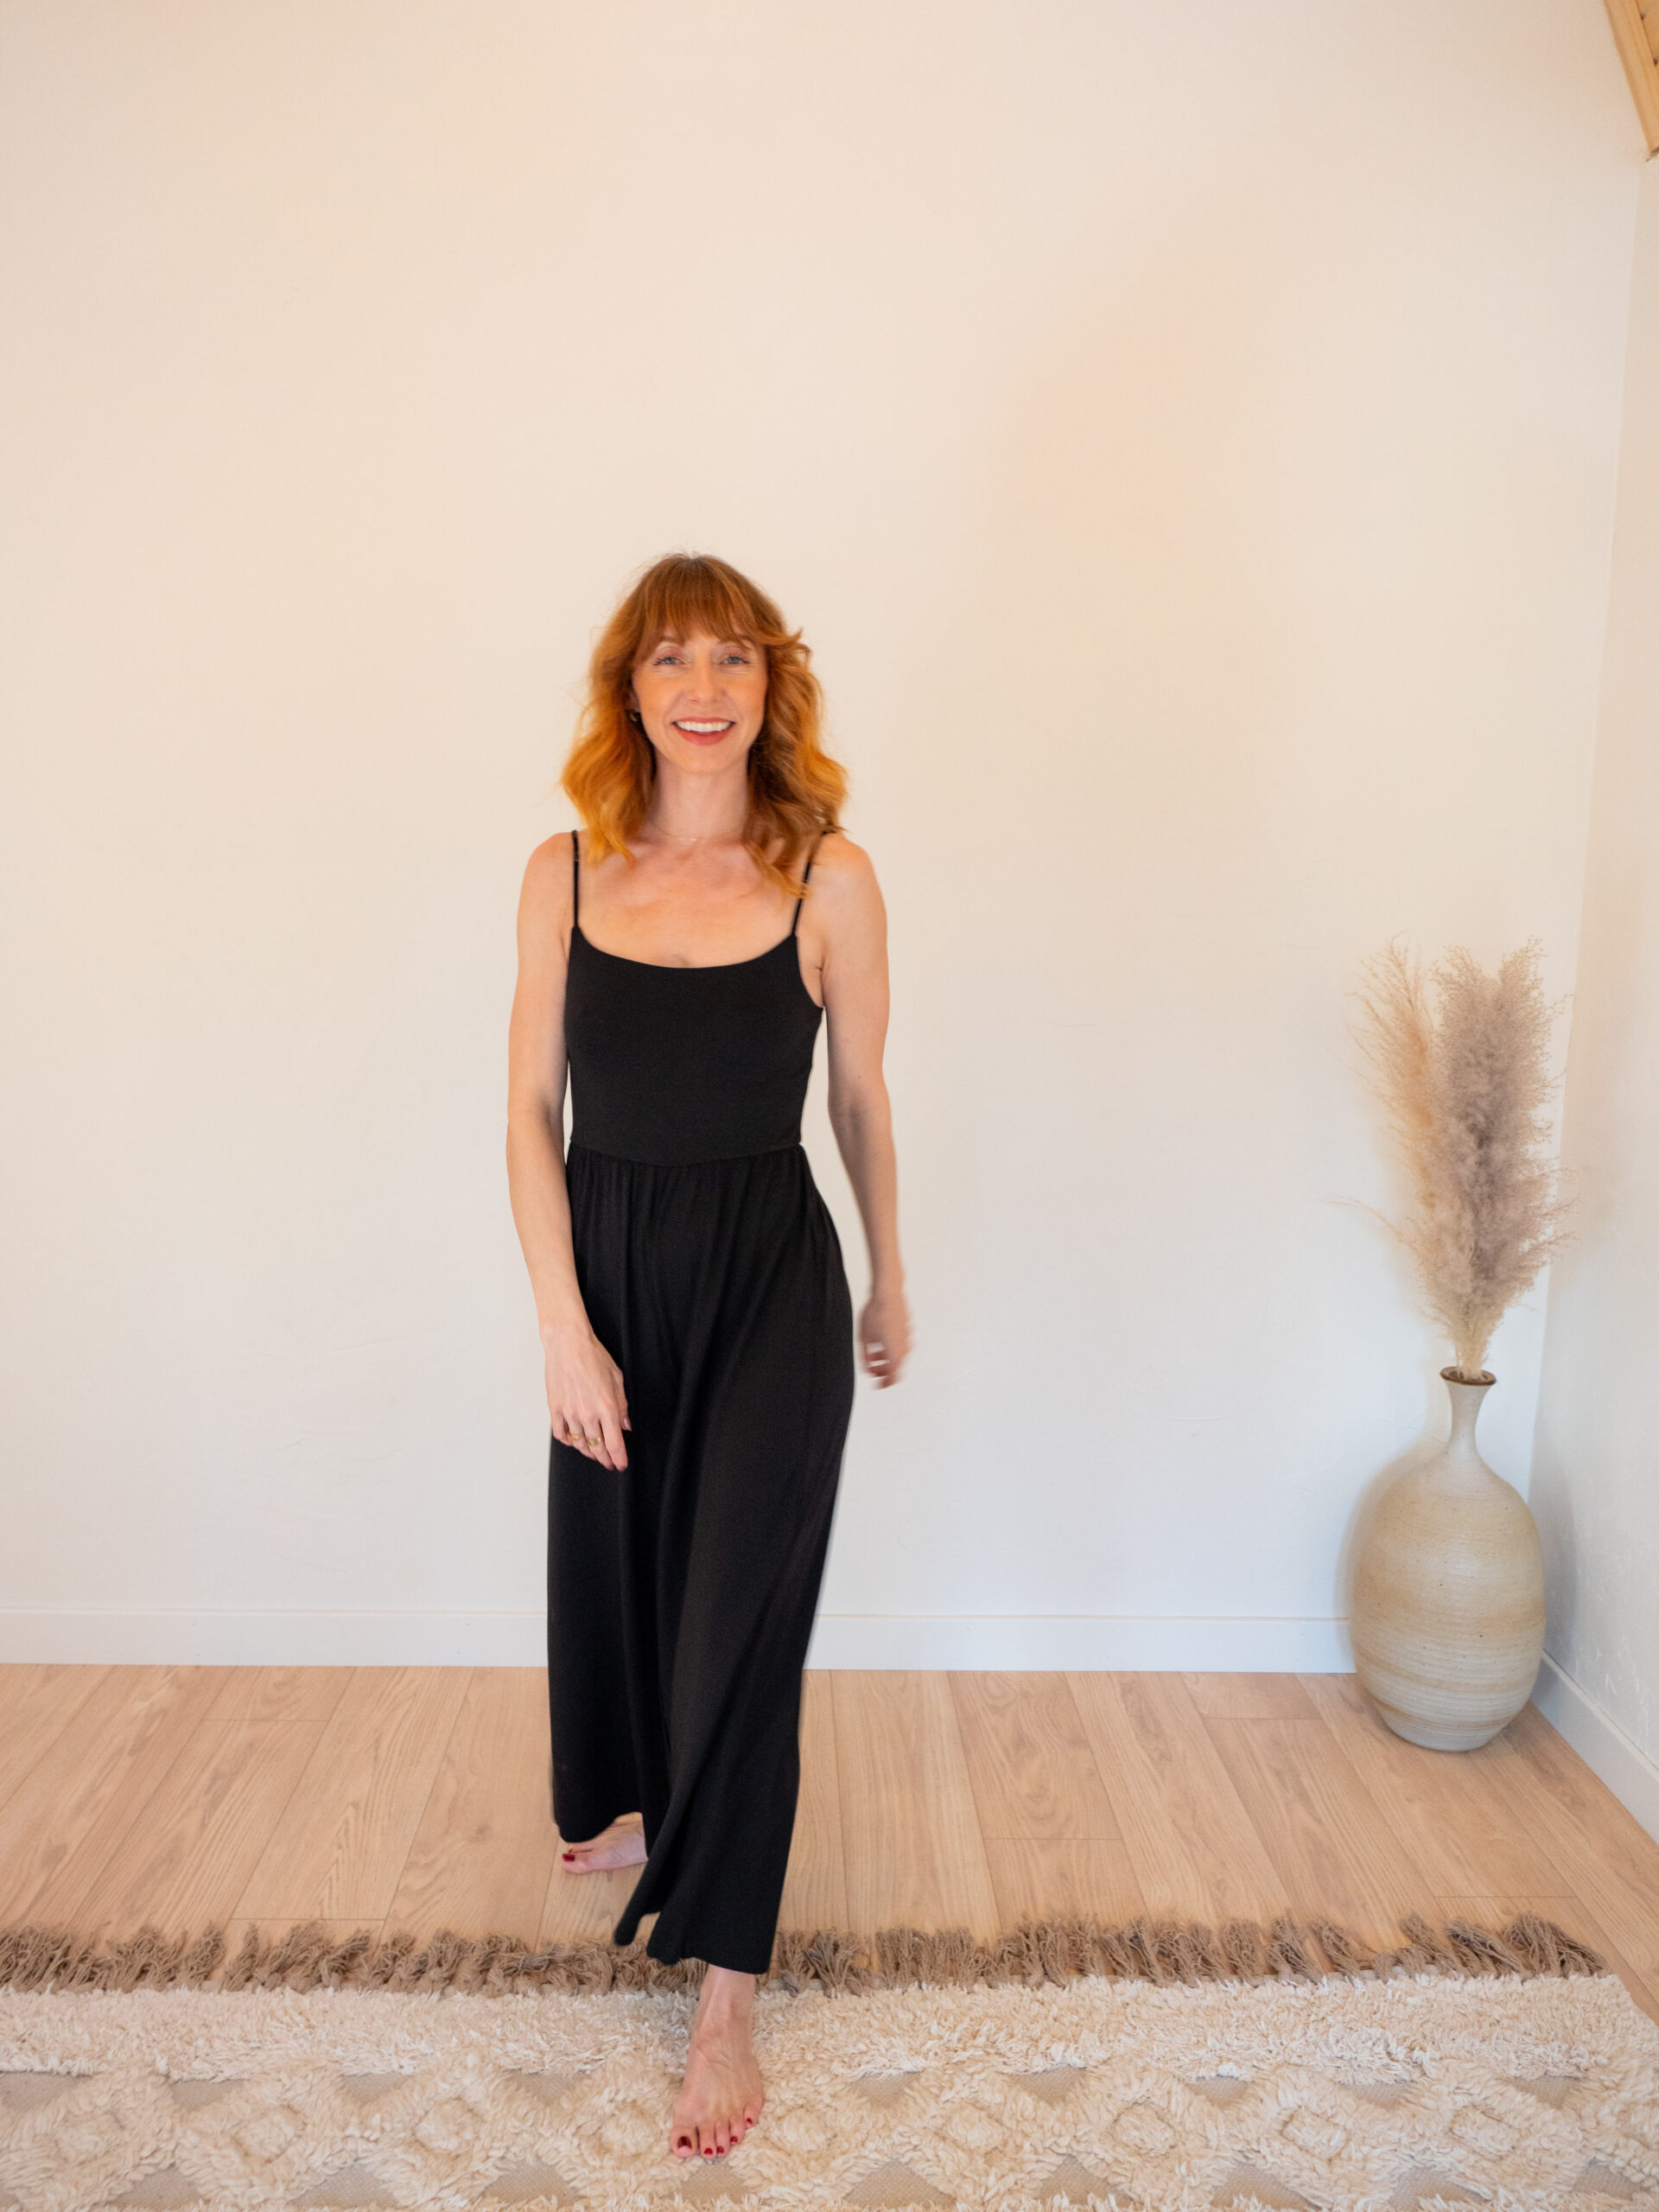 A woman in a black jumpsuit standing on a rug.